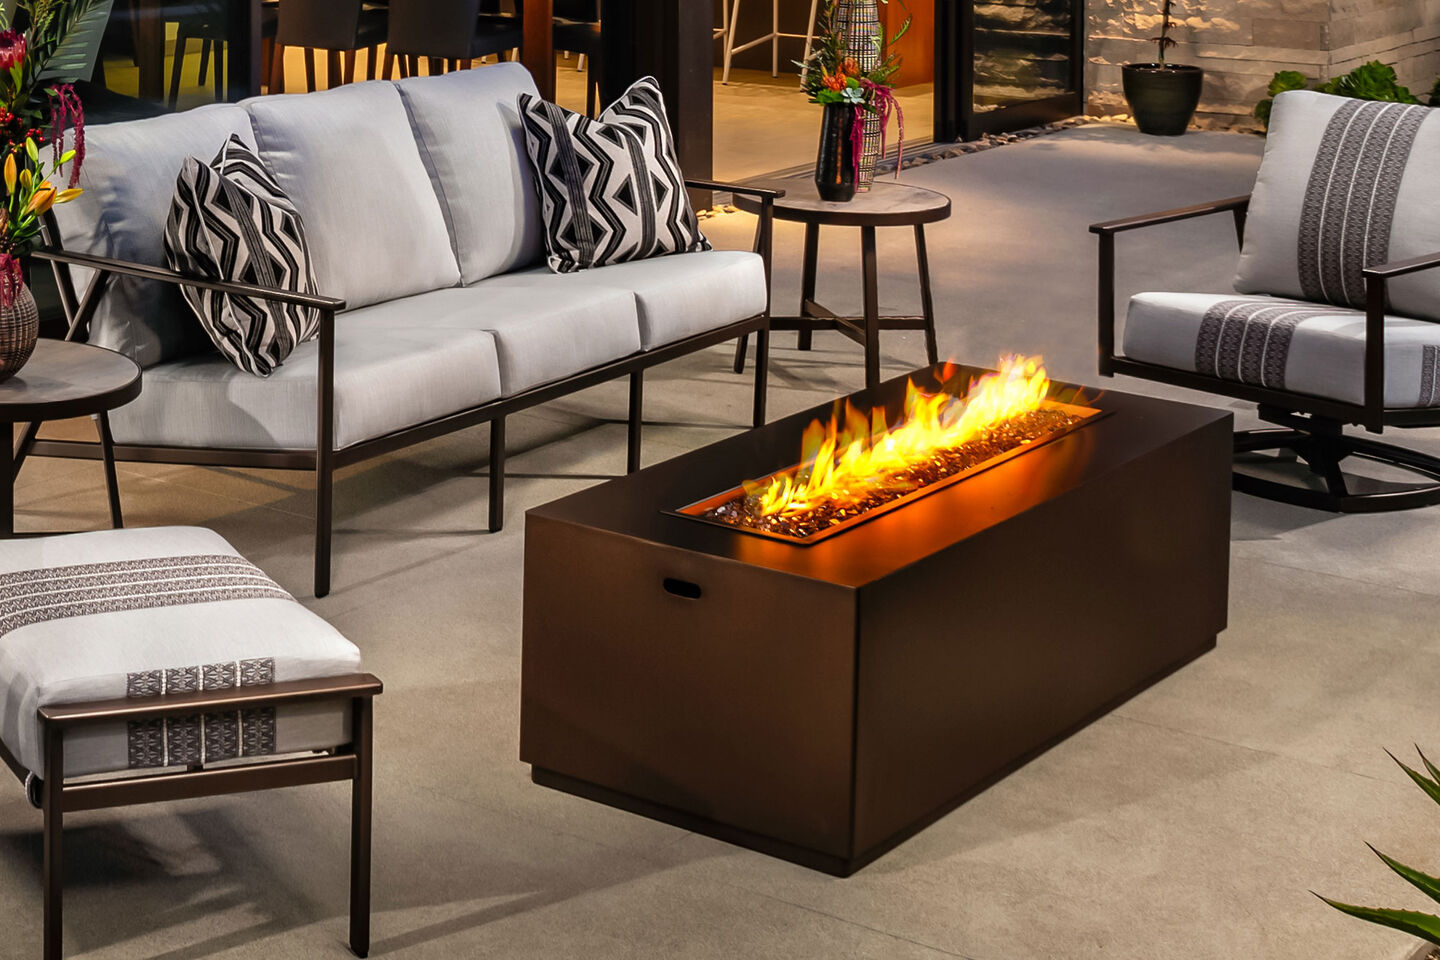 Rectangular fire pit with lounge furniture